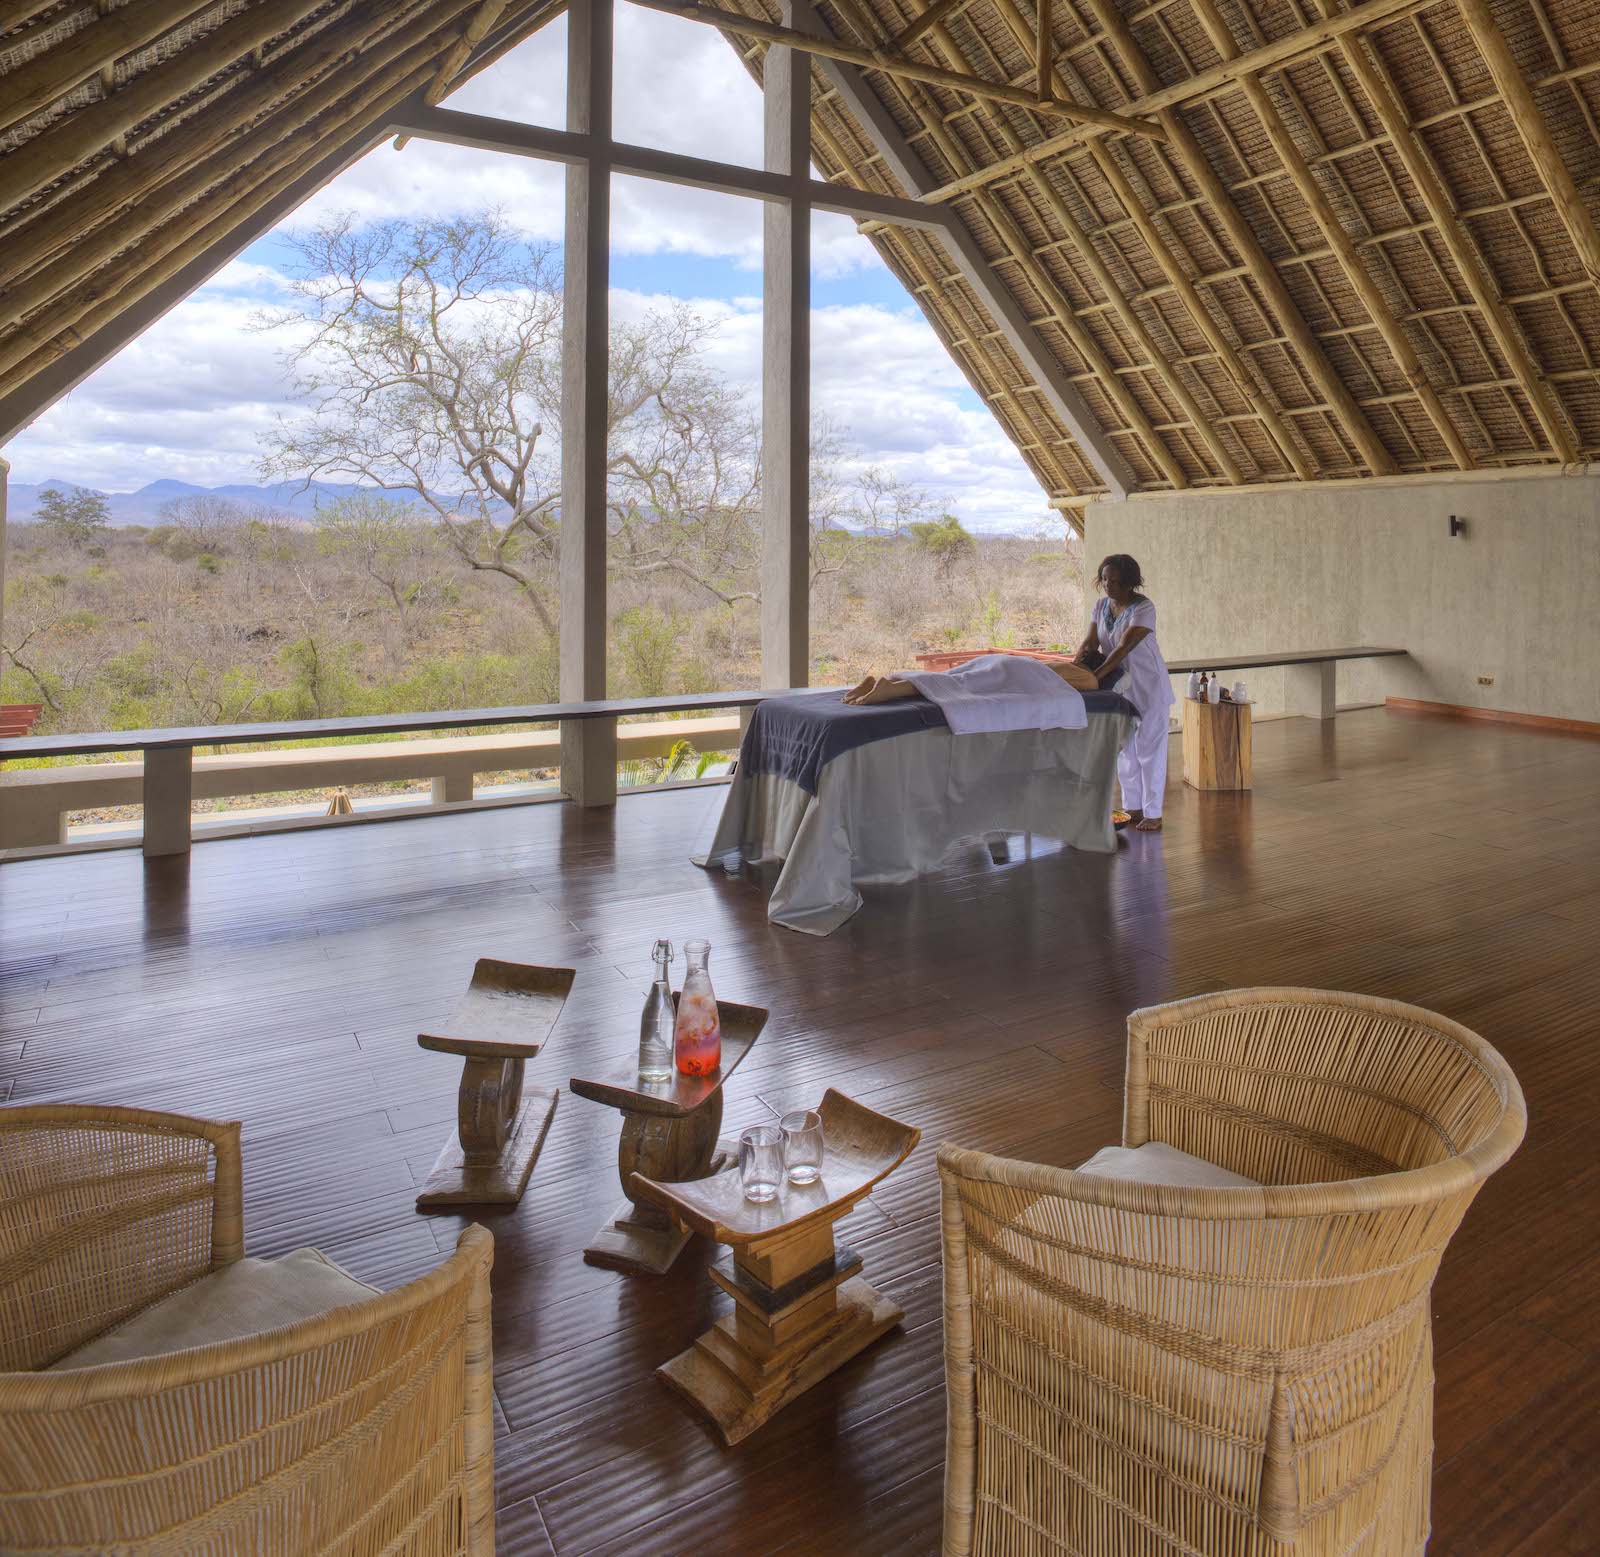 Finch Hatton's Tented Camp